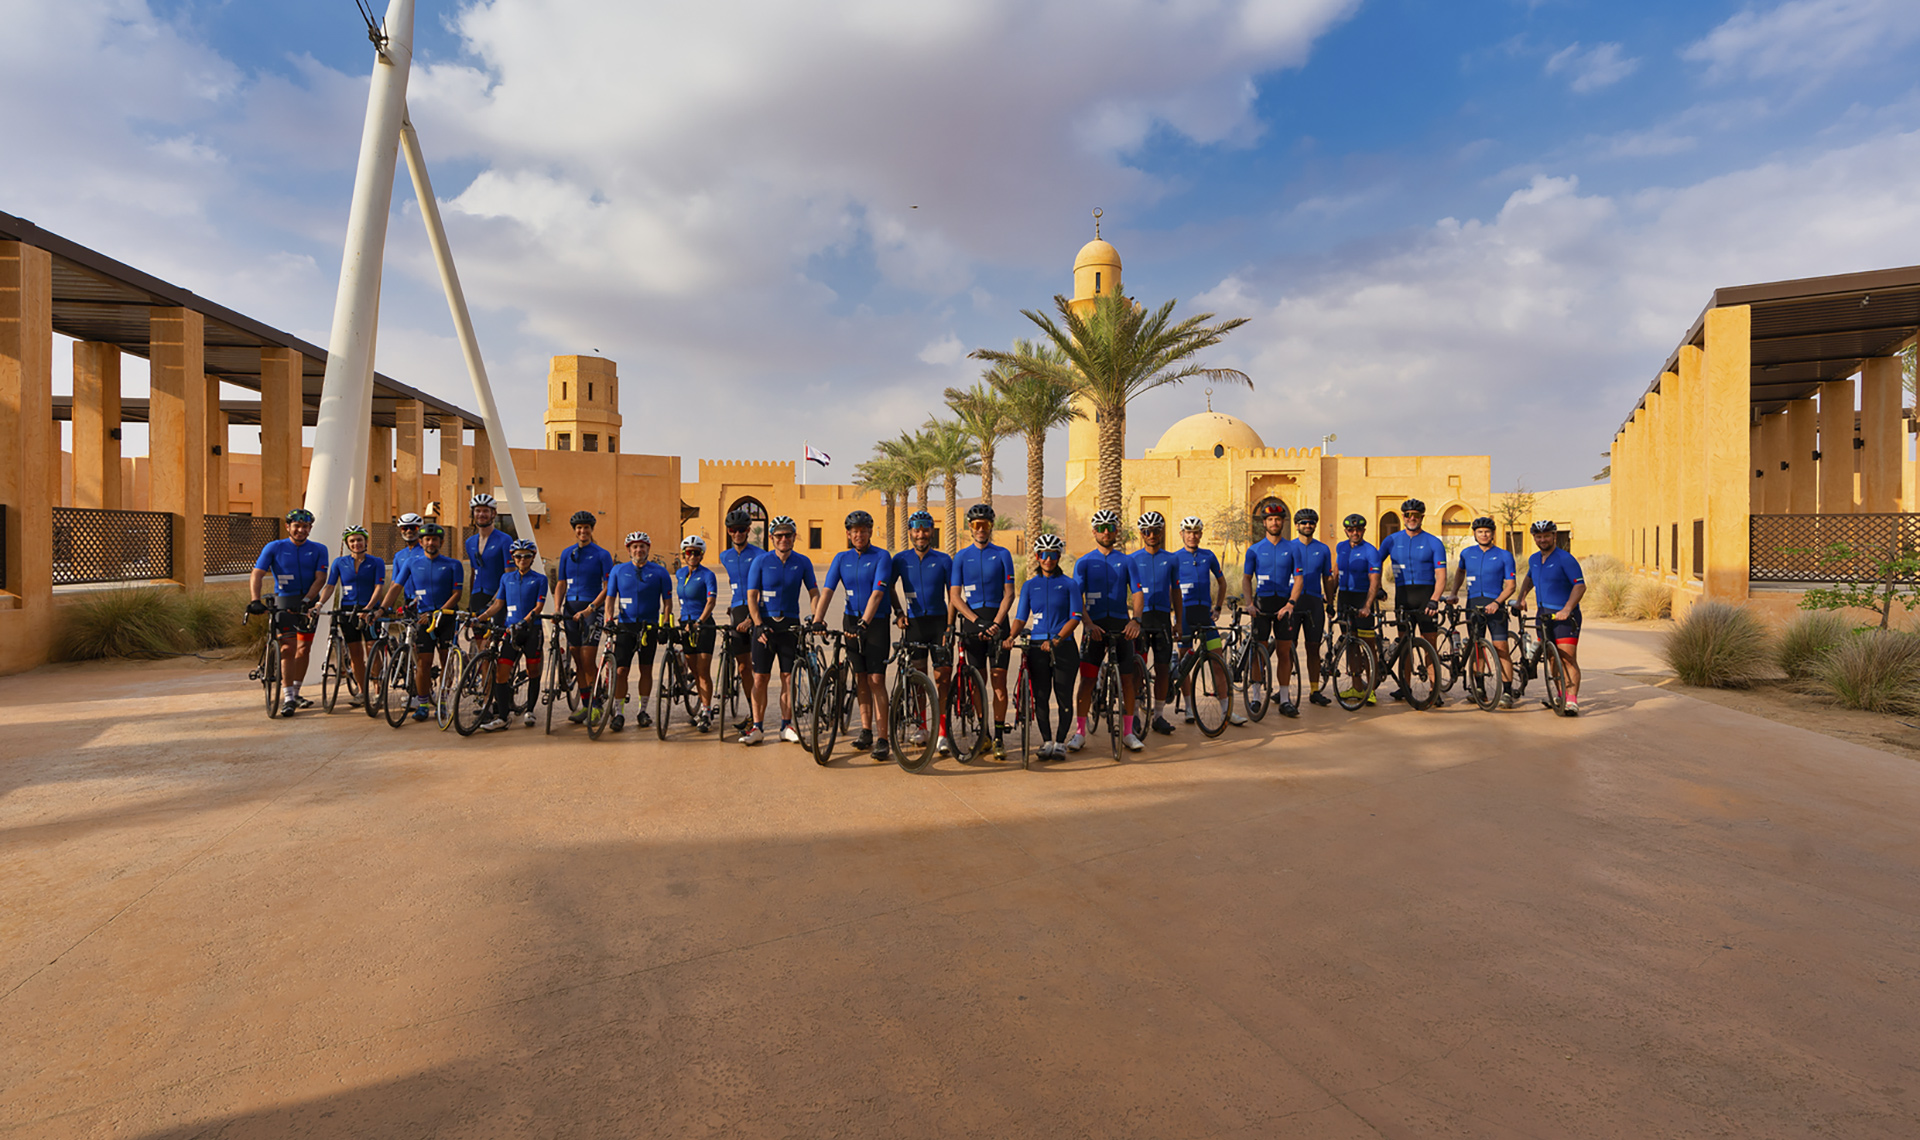 UAE cyclists to take on 2nd edition of "The First Group 7 Emirates Cycle Challenge" in support of Dubai Cares and Rashid Center for People of Determination